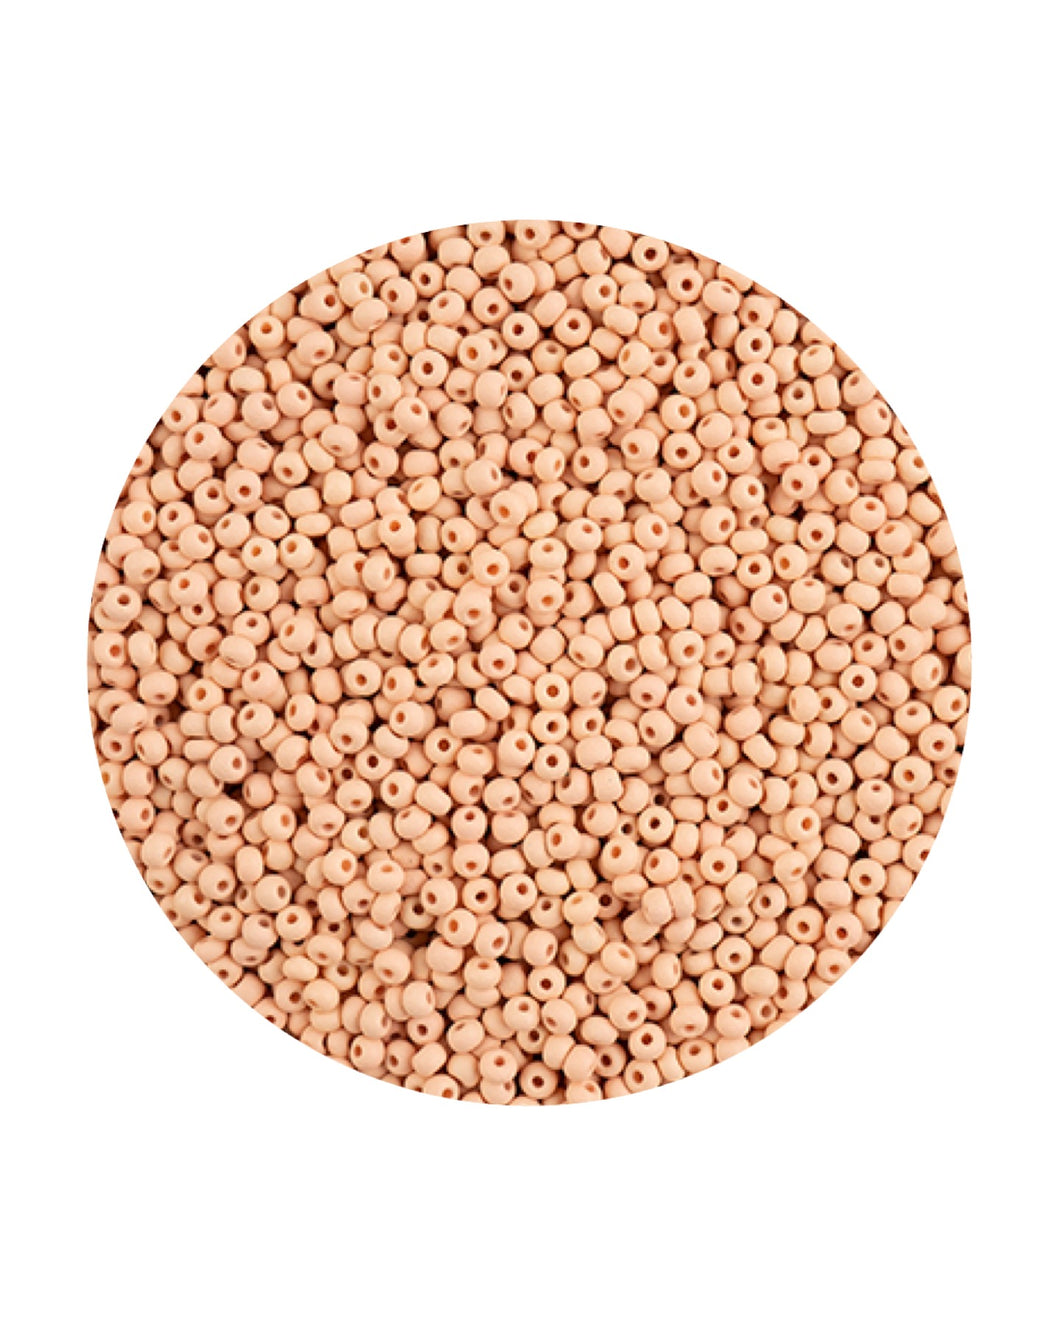 11/0 Preciosa Permalux Seed Beads Dyed Chalk Apricot Matte, 23g Bags